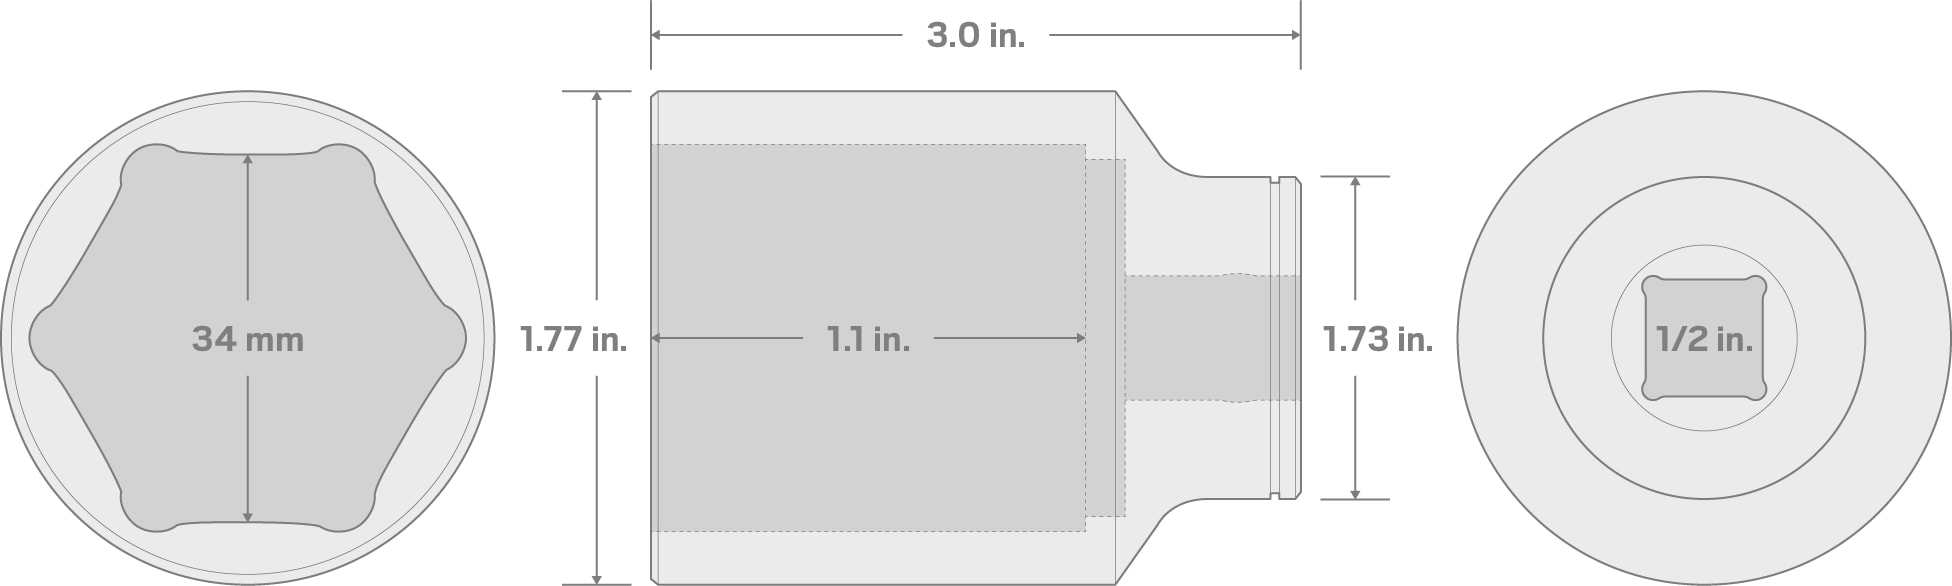 Specs for 1/2 Inch Drive x 34 mm Deep 6-Point Socket